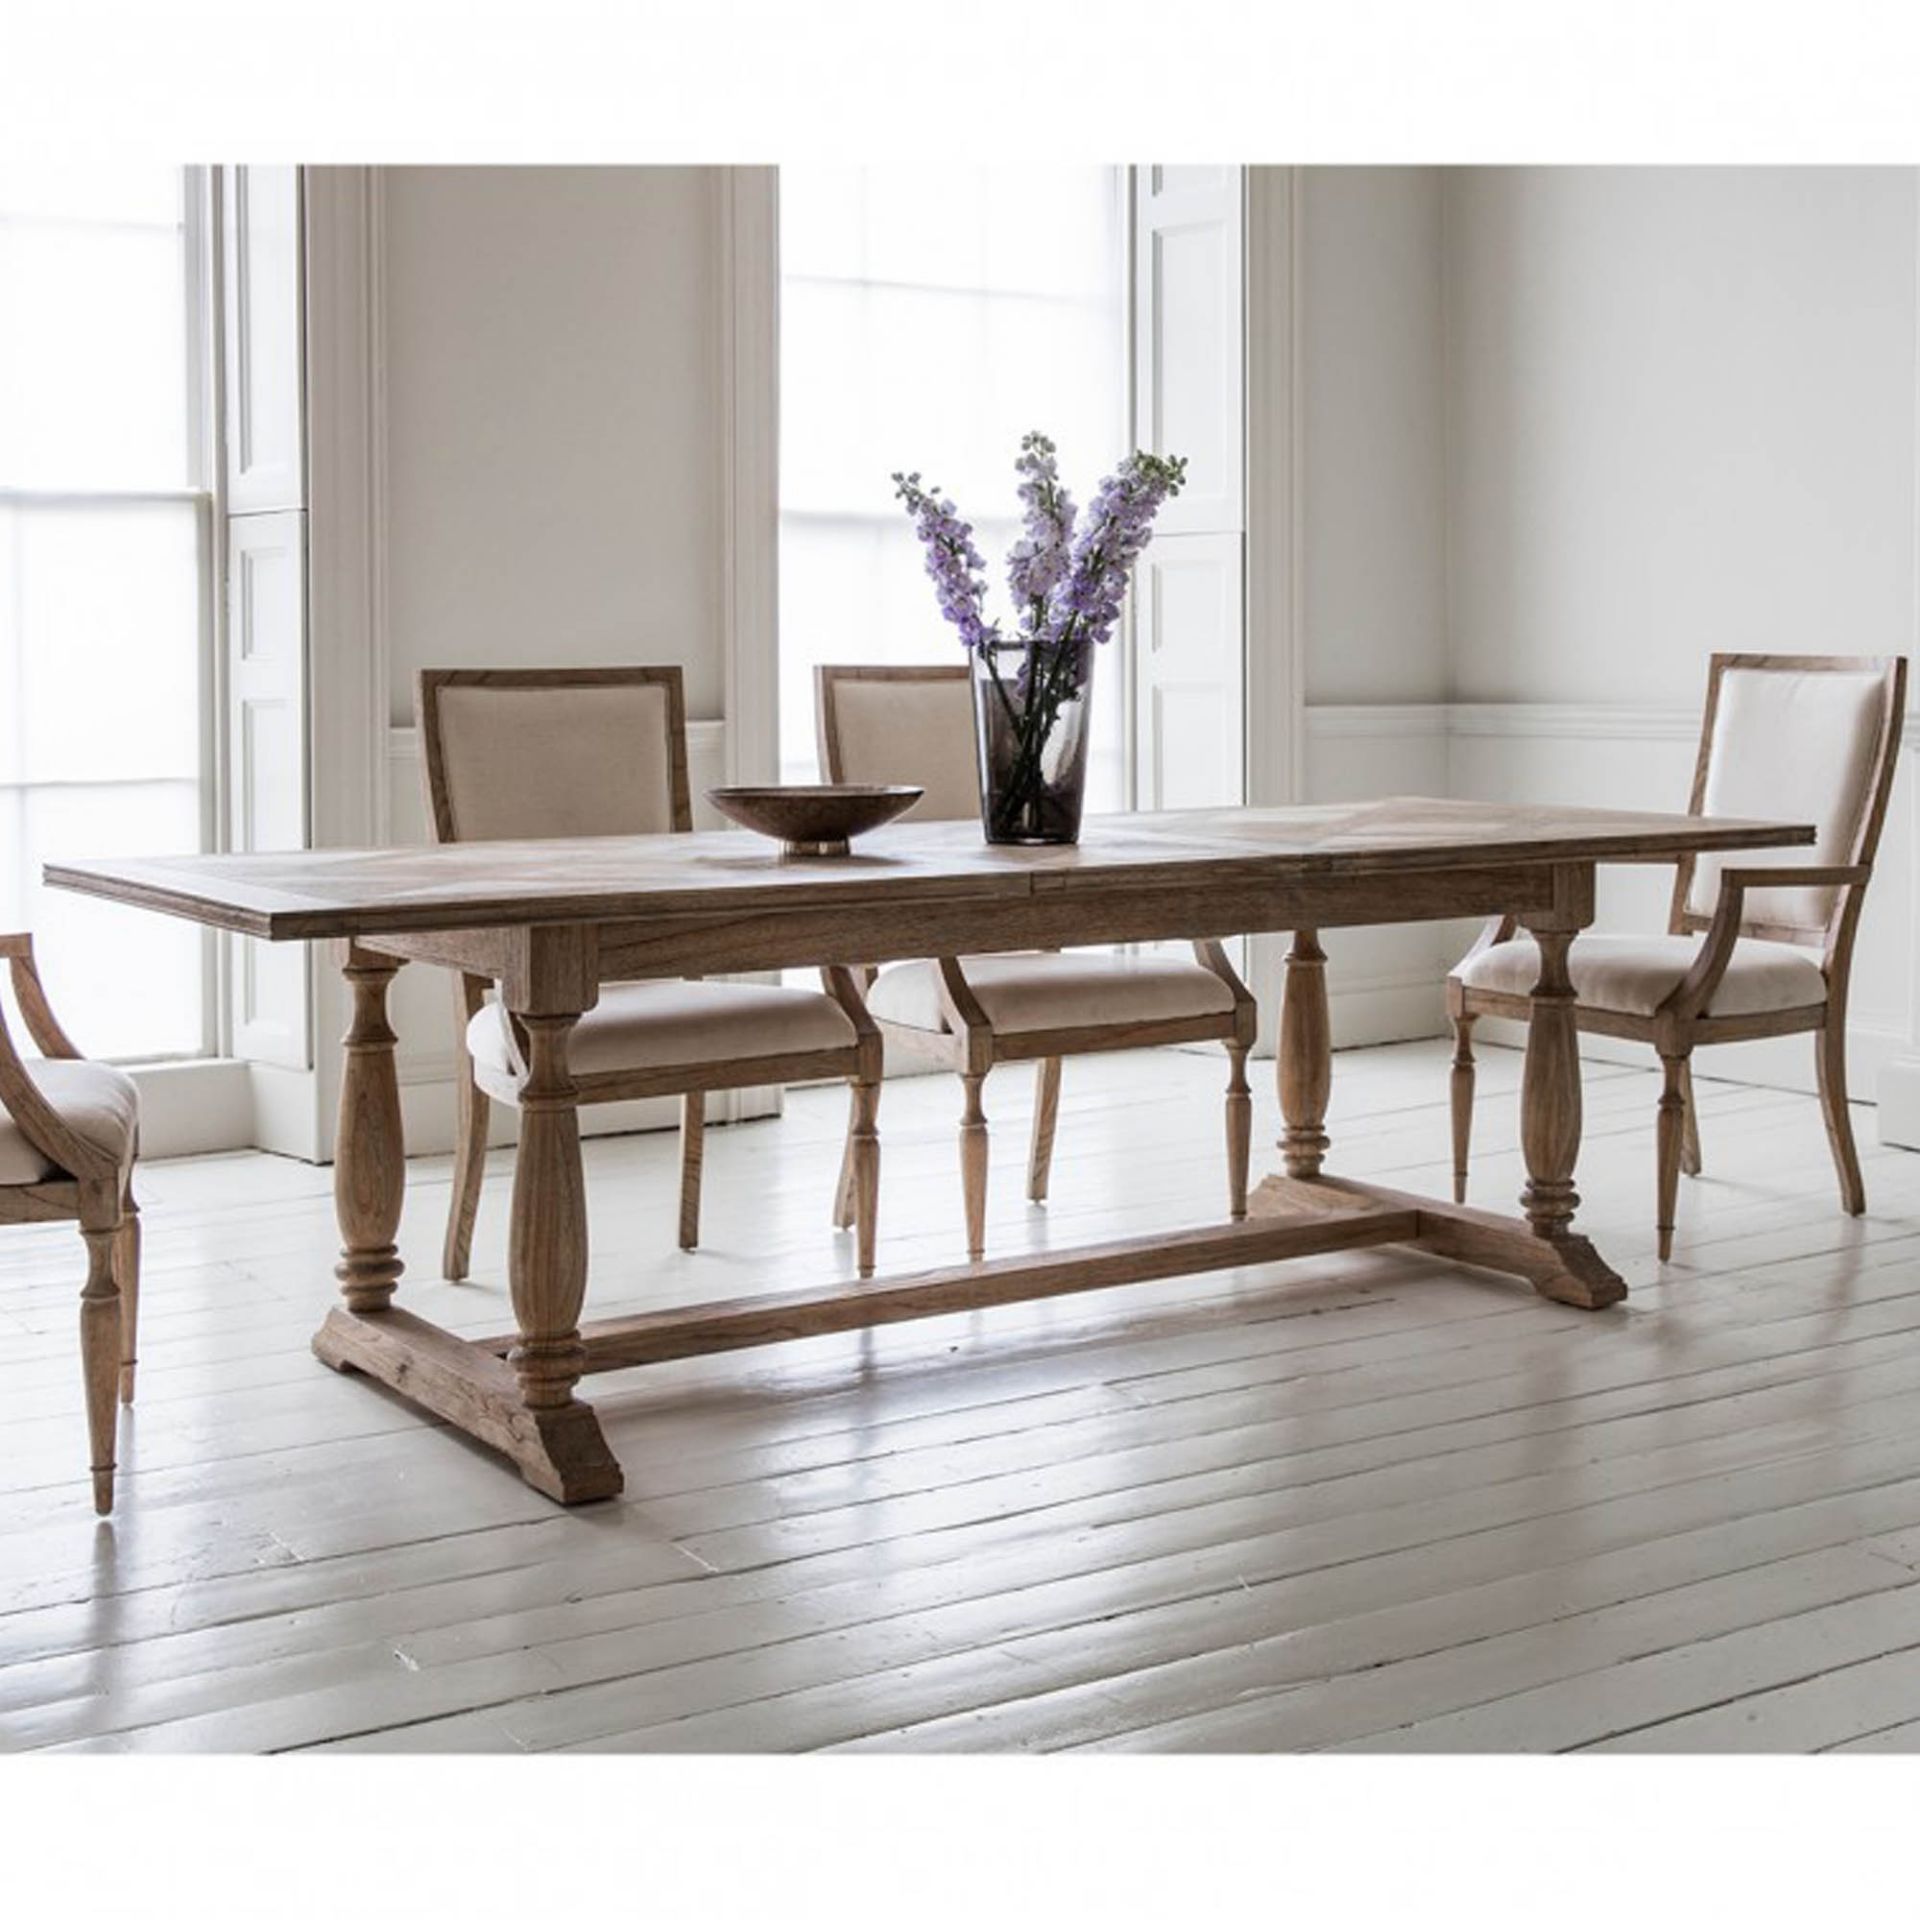 Mustique Extending Dining Table Part of a brand new addition to the Mustique Collection cleverly